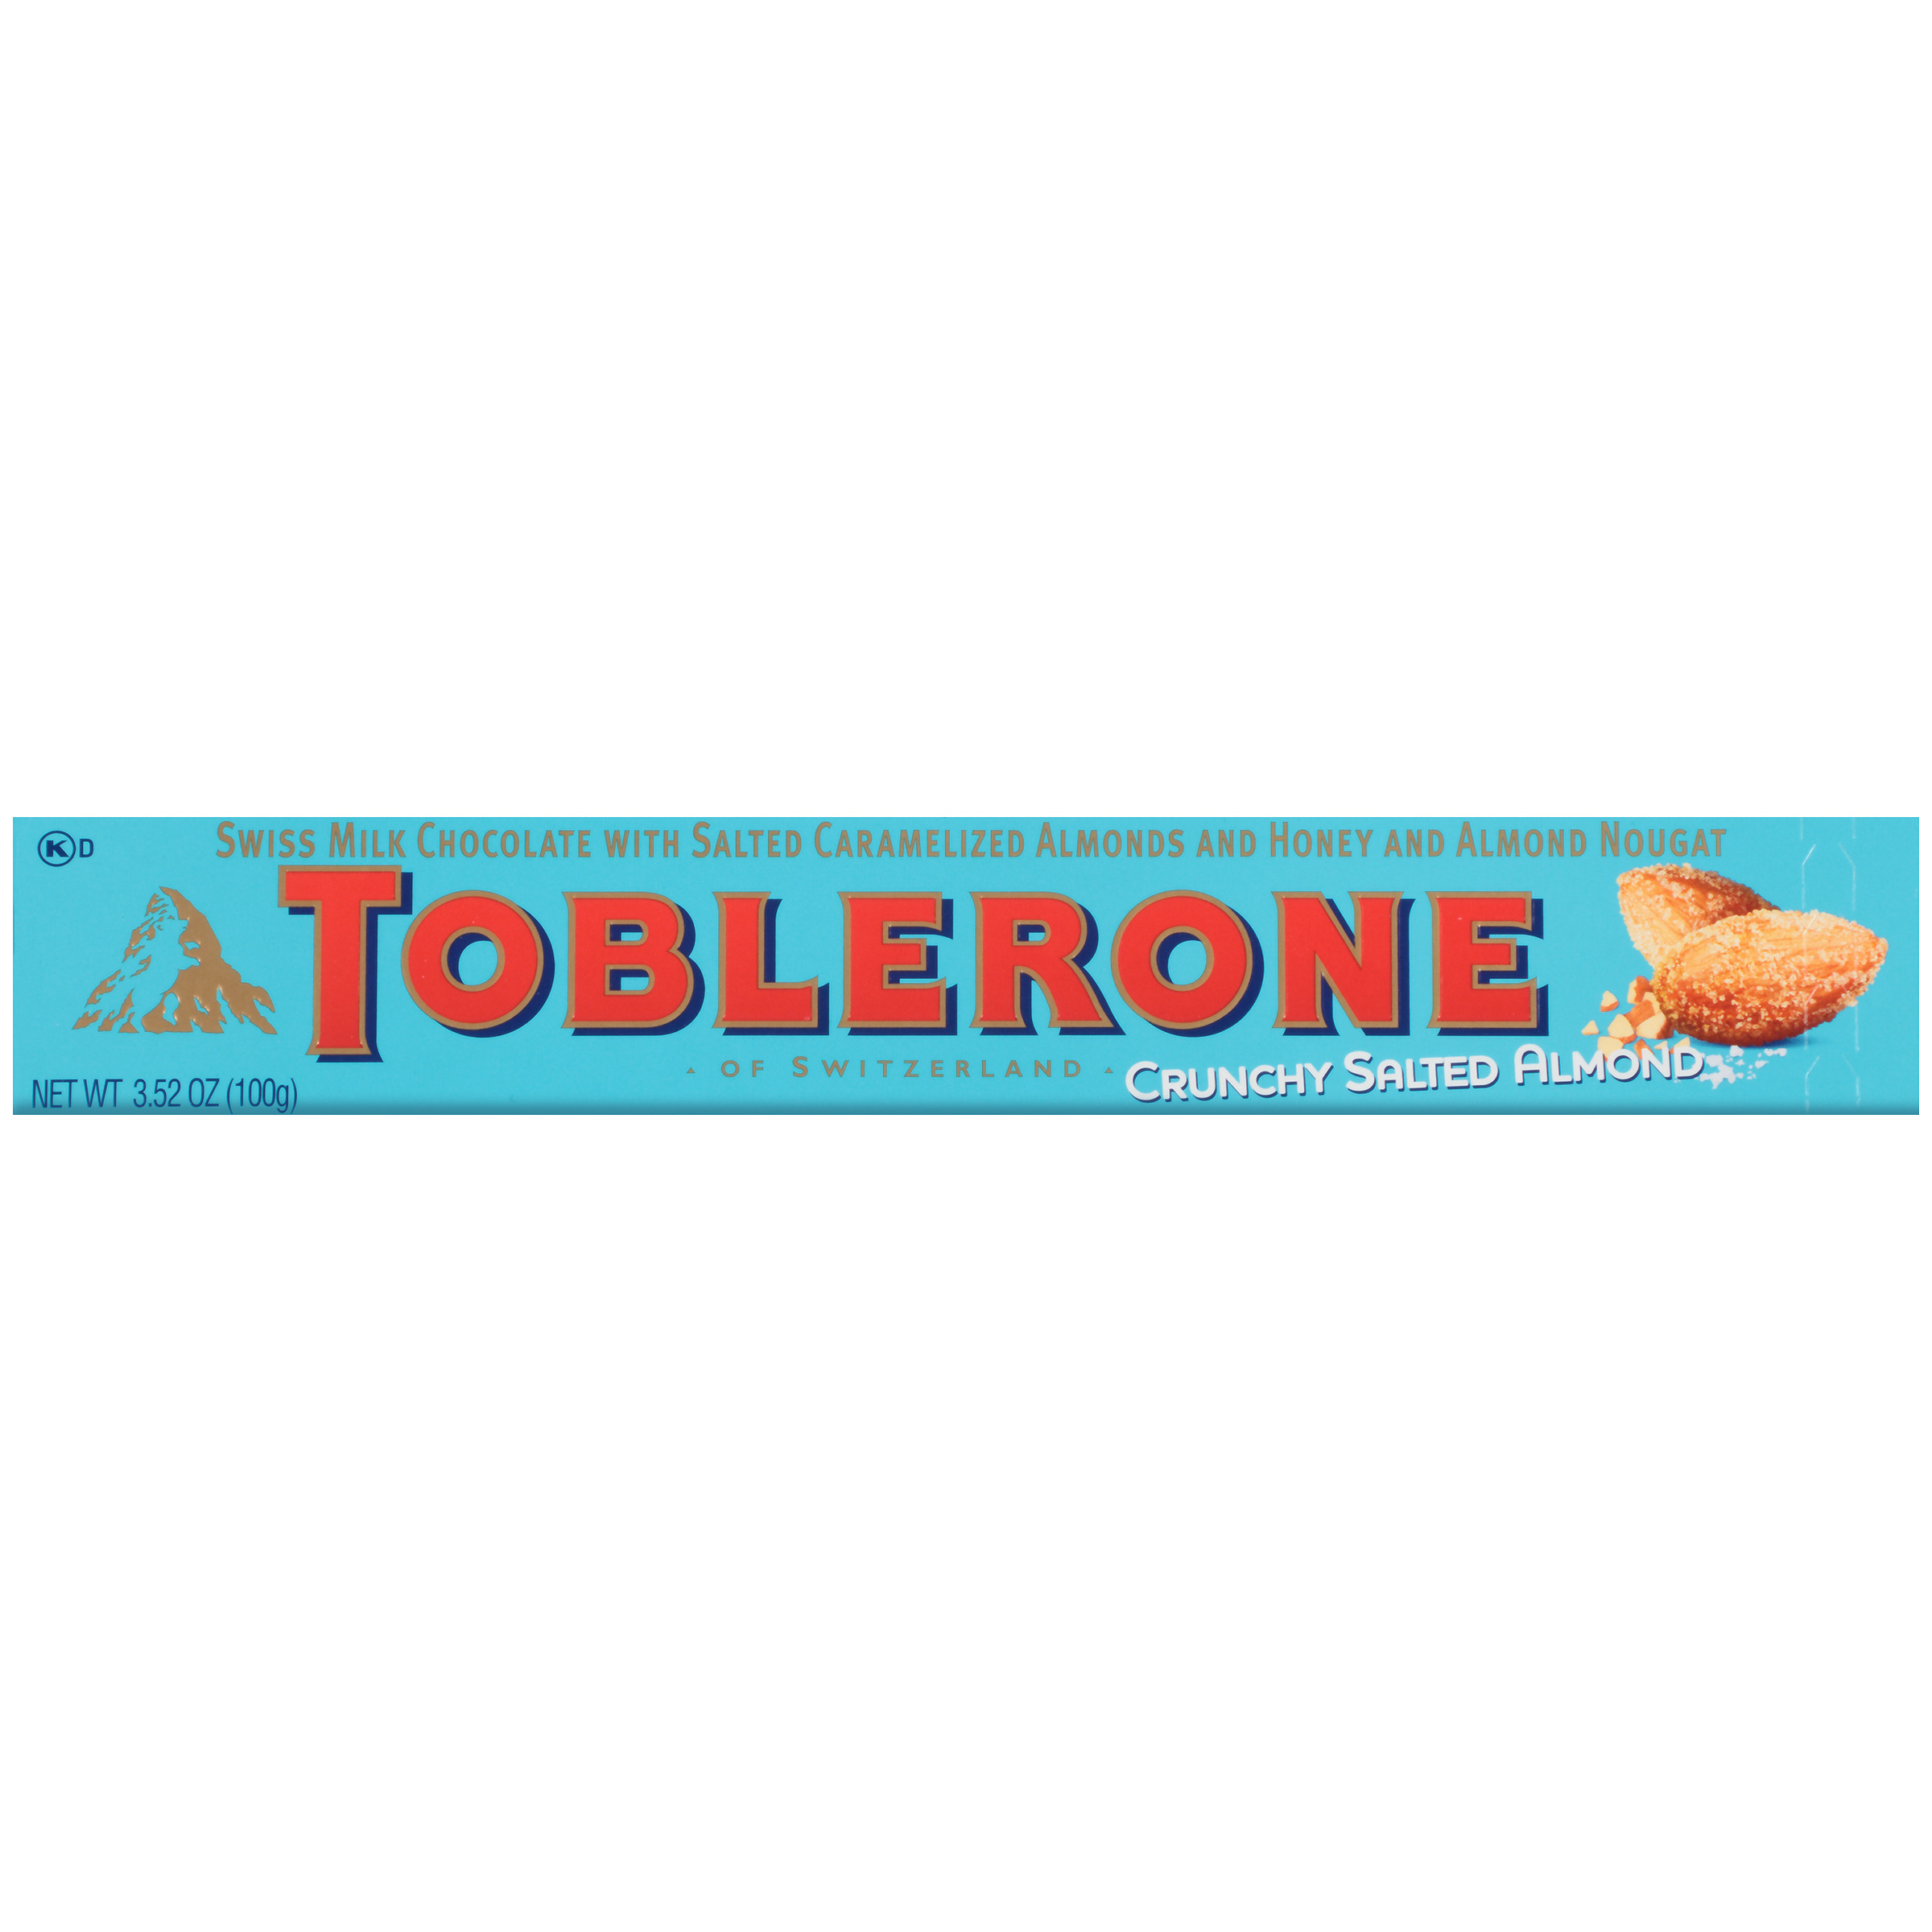 Toblerone Swiss Milk Chocolate Candy Bars with Salted Caramelized Almonds and Honey and Almond Nougat, 3.52 oz Bar-0